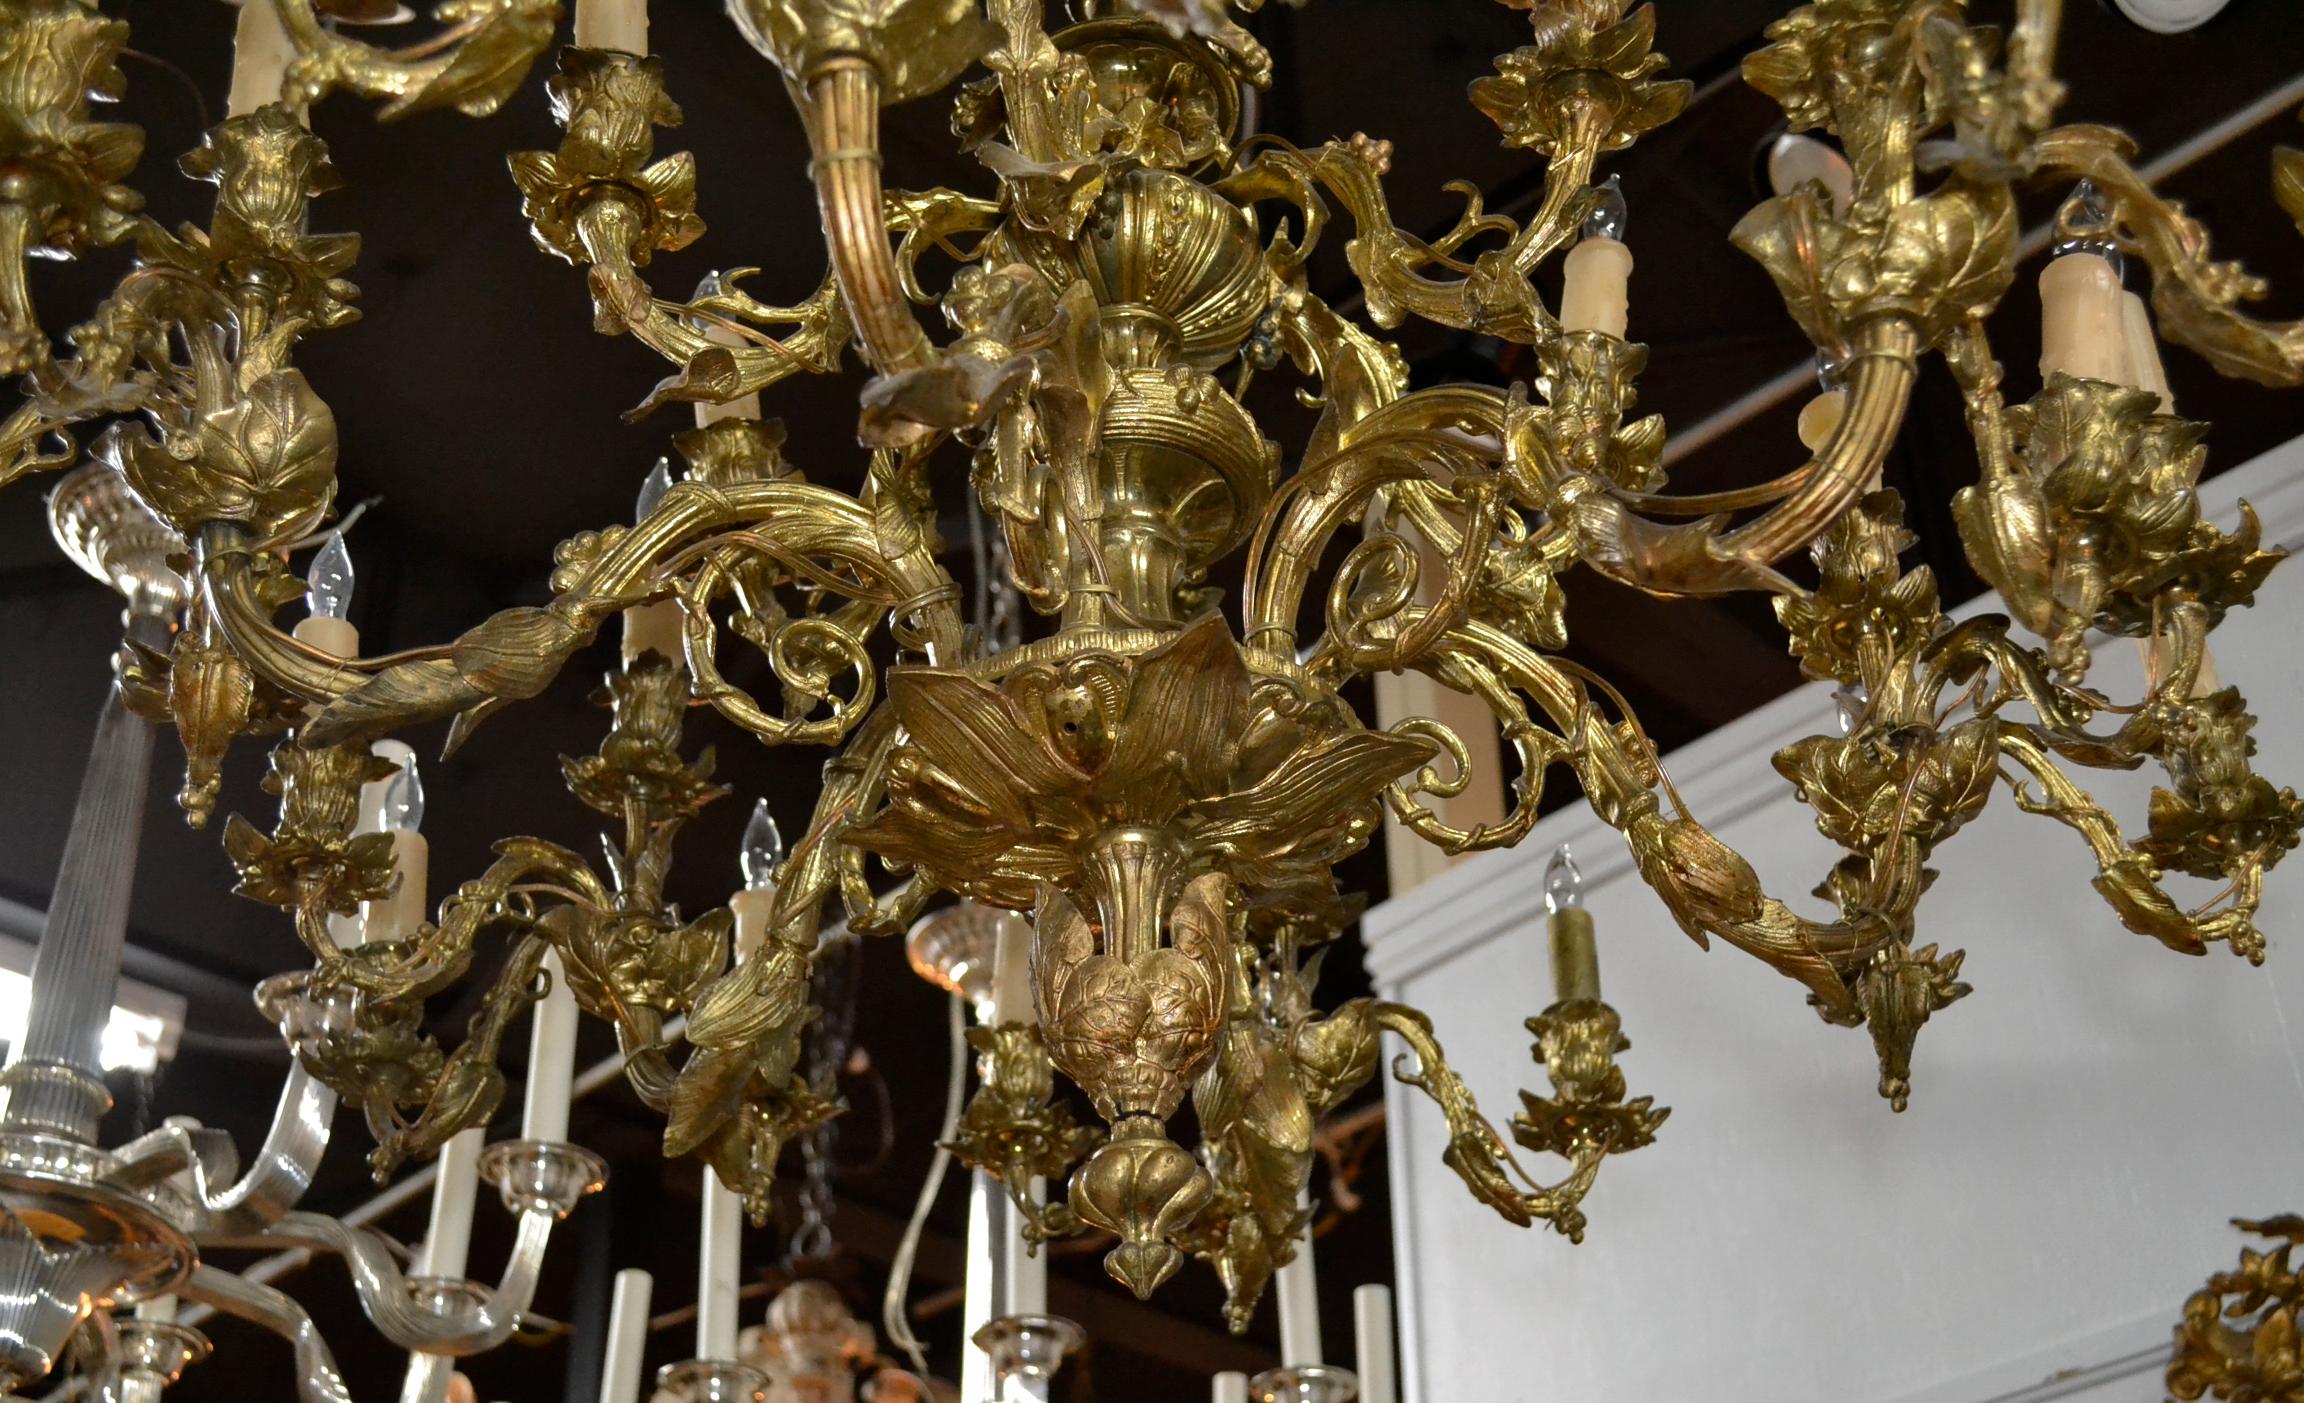 Fine 19th century French gilt bronze chandelier with 30-lights. In acanthus leaf and foliate form with gracefully curved arms and a beautiful, aged gilt patina.